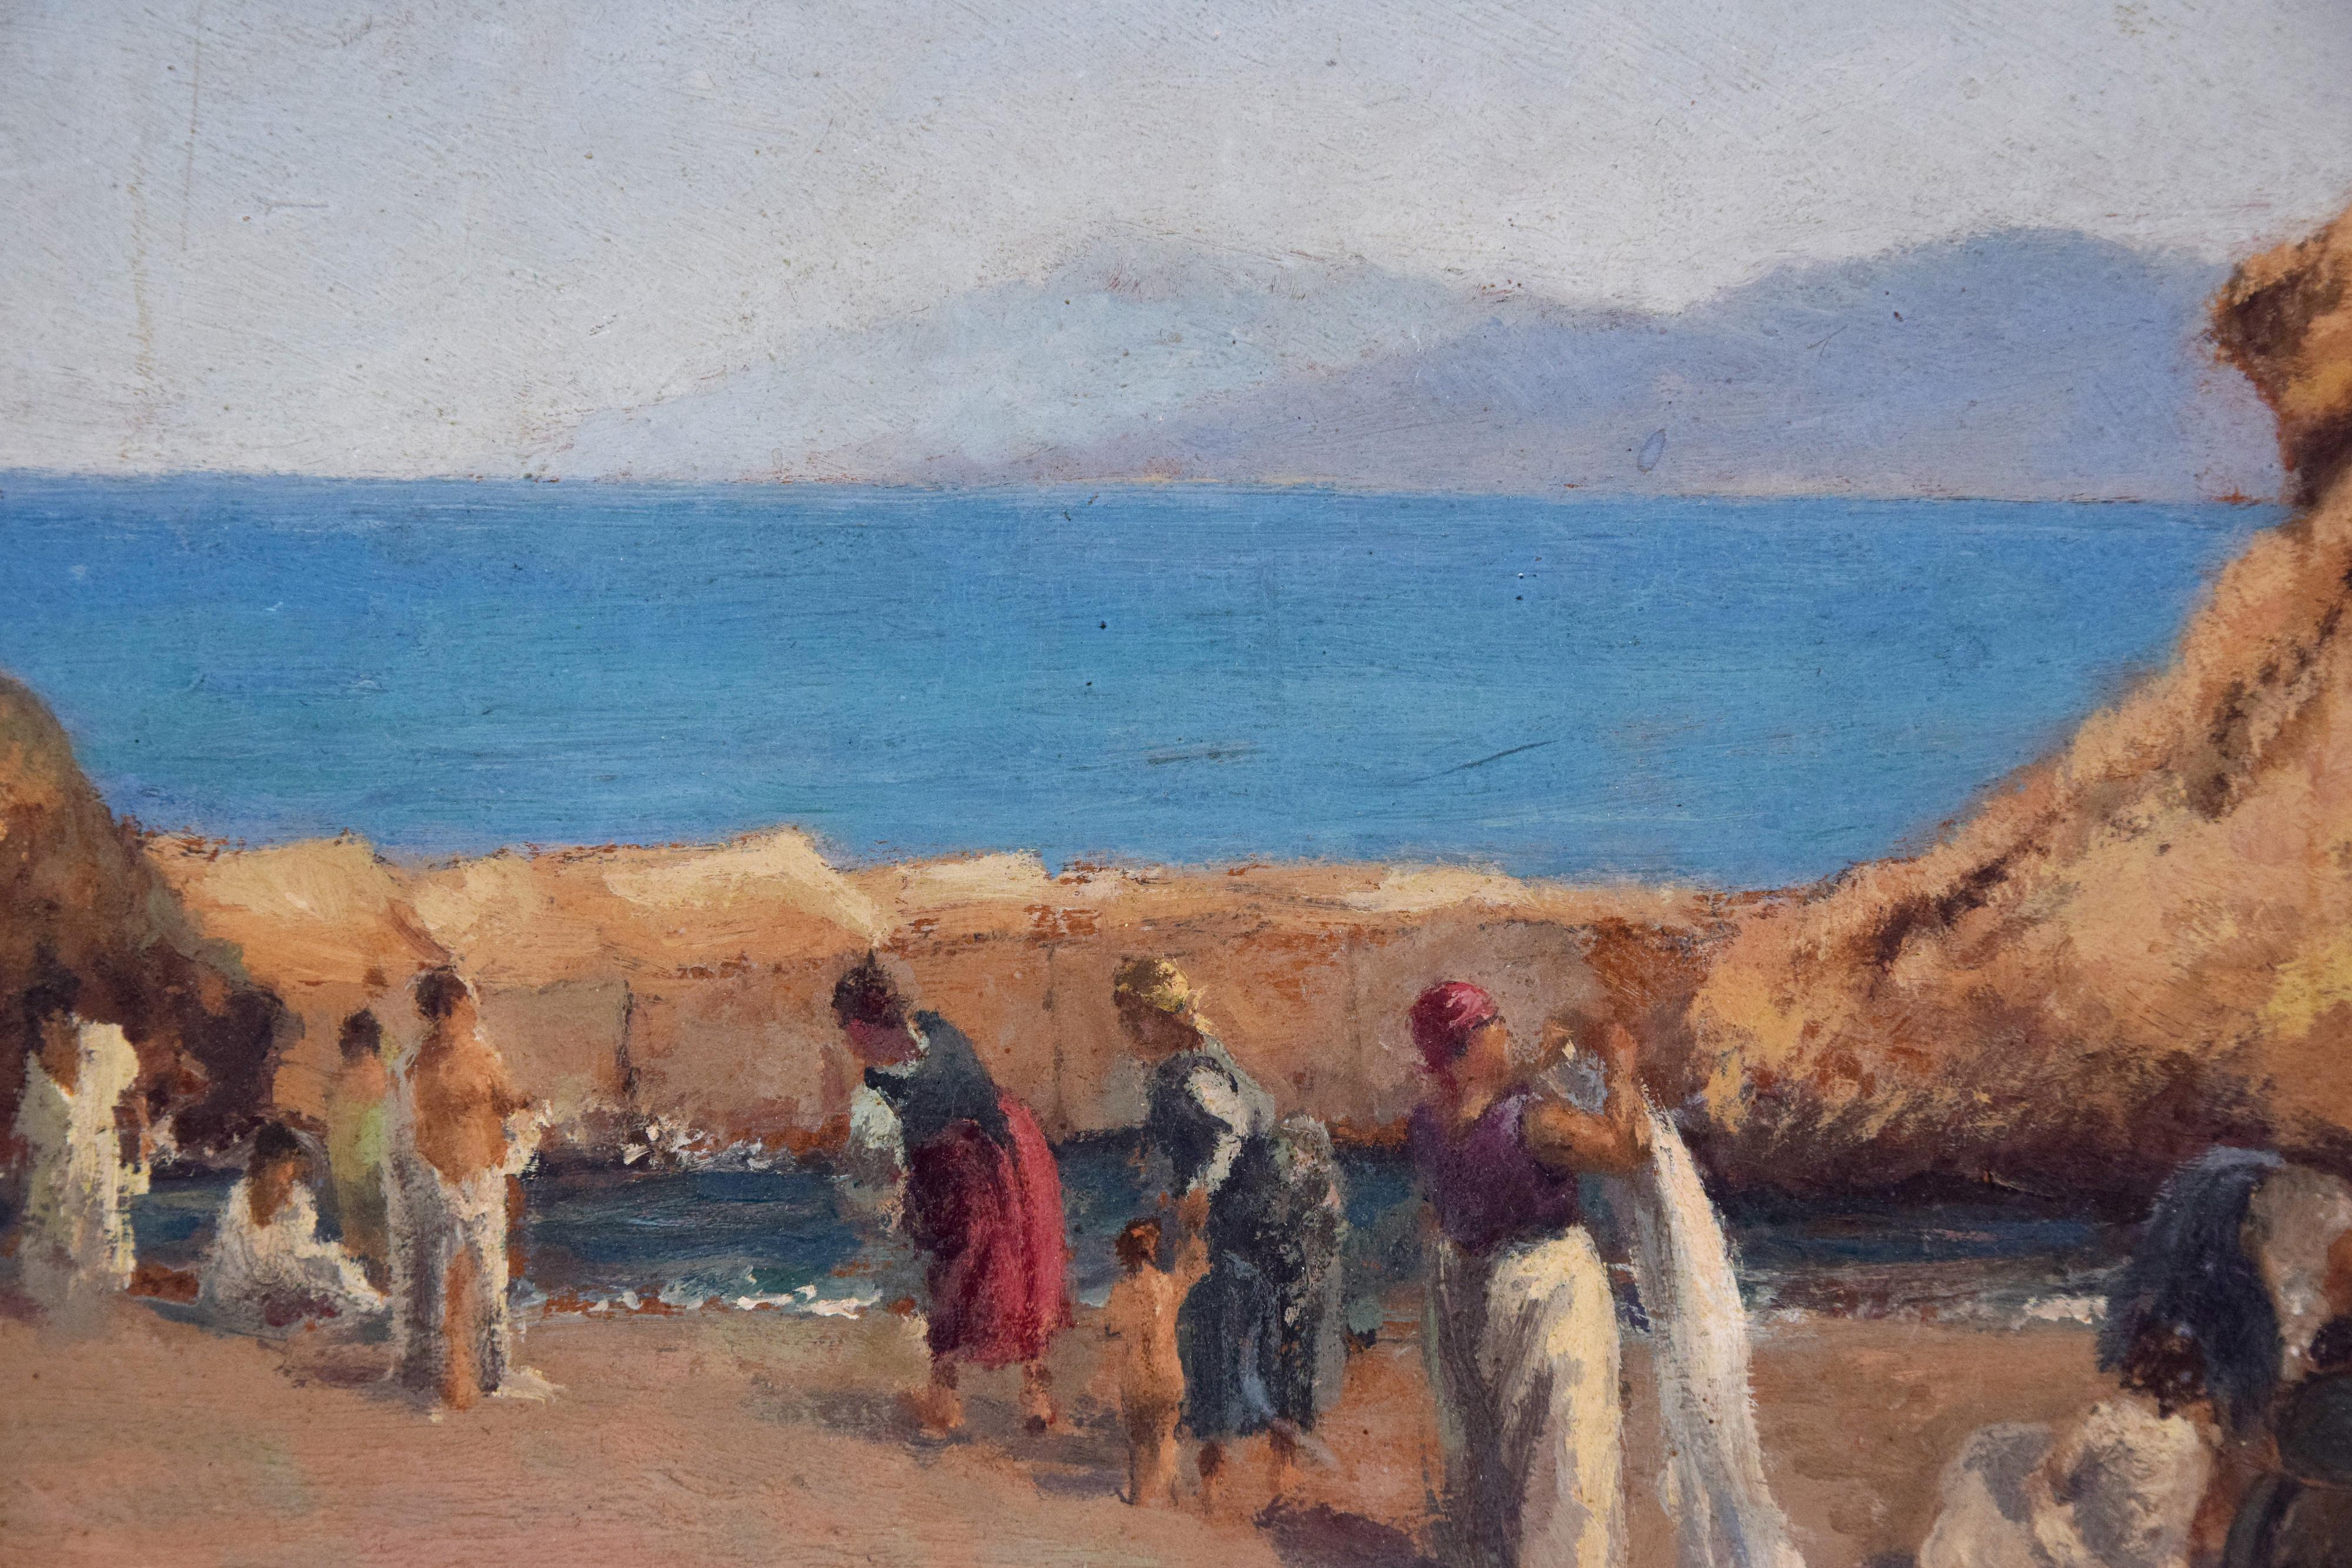 Women on the beach in beautiful early 20th century oil painting, by the Italian artist, Domenico Colao (1881-1943).

Hand-signed in brown oil on lower right corner.

This relaxing original painting, except for some imperceptible color peelings on